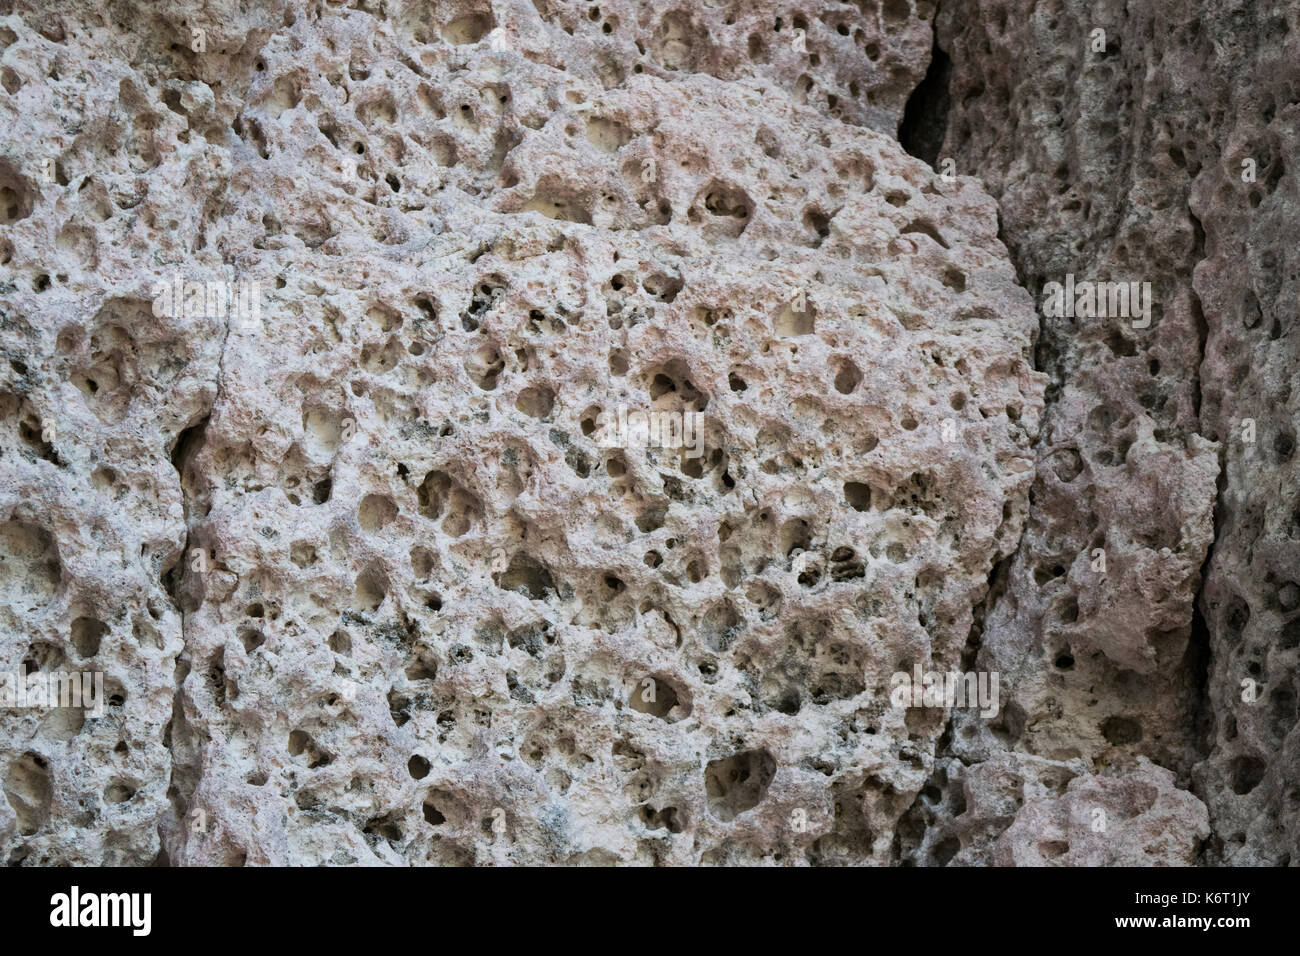 Pale pink or pinkish limestone rock found along the cliffs of South-West Malta. Rocks are full of holes by weathering and erosion. Rdum tal-Mara Malta Stock Photo